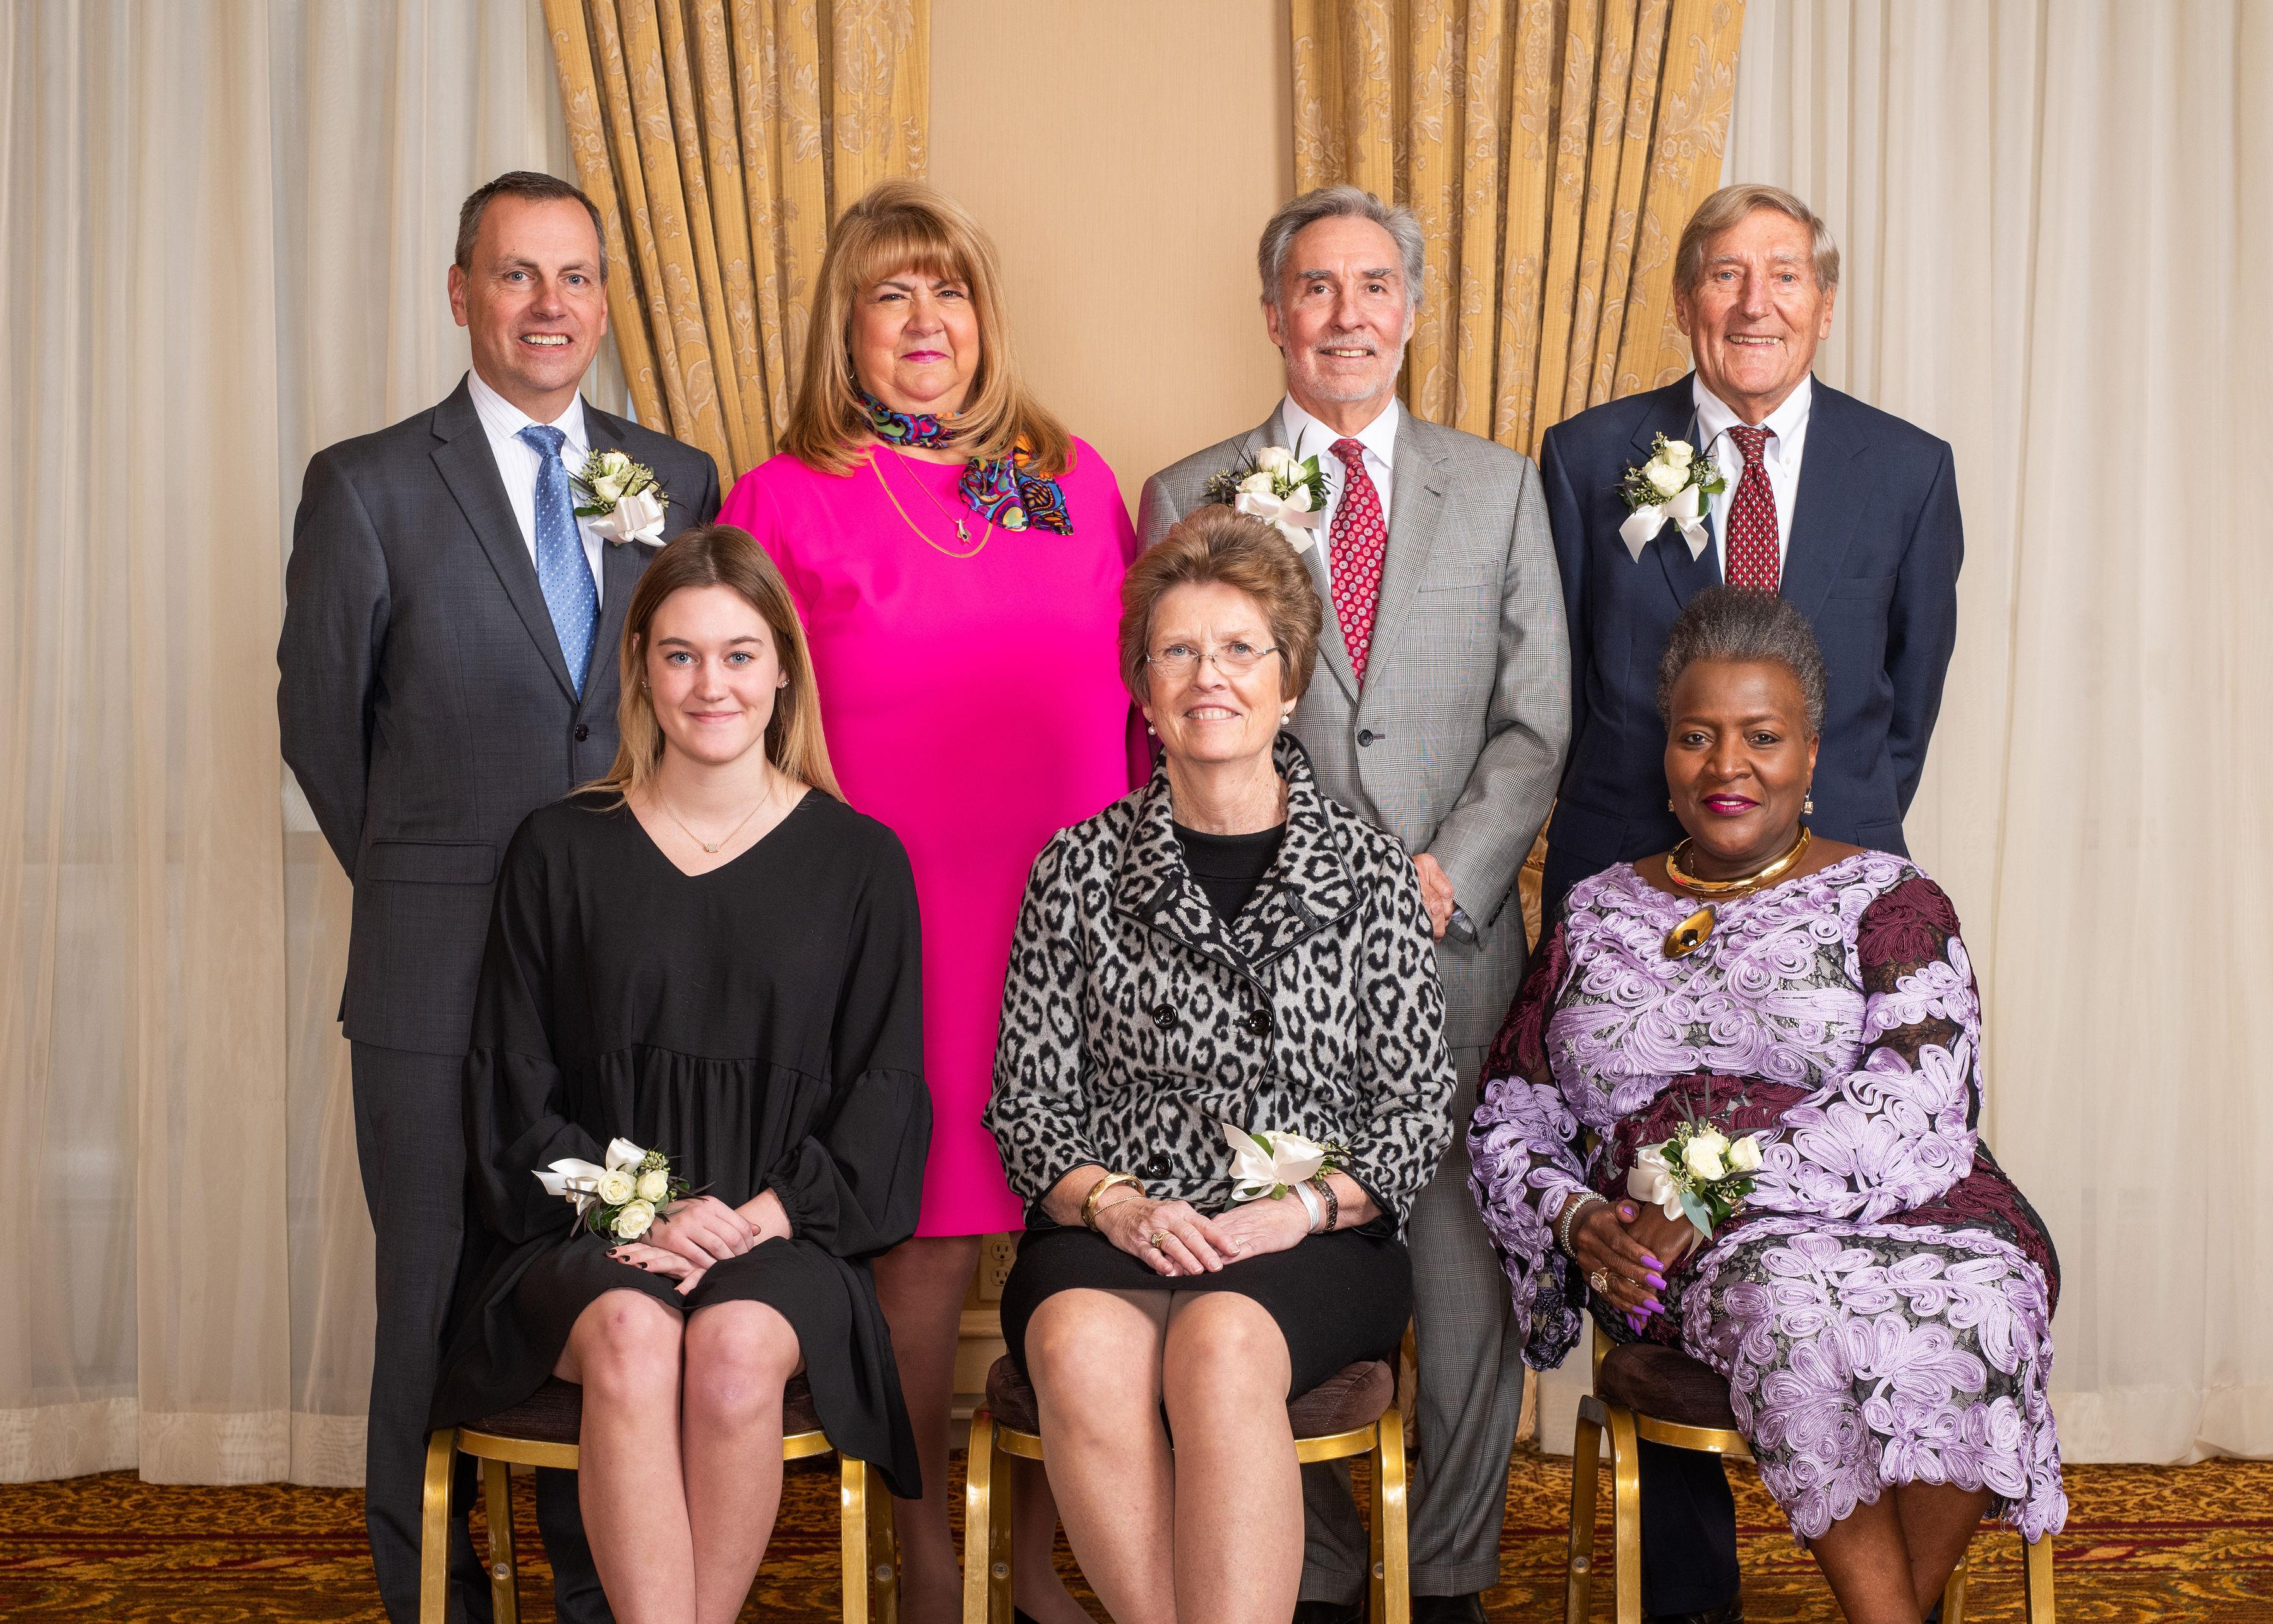 2019 National Philanthropy Day Honorees